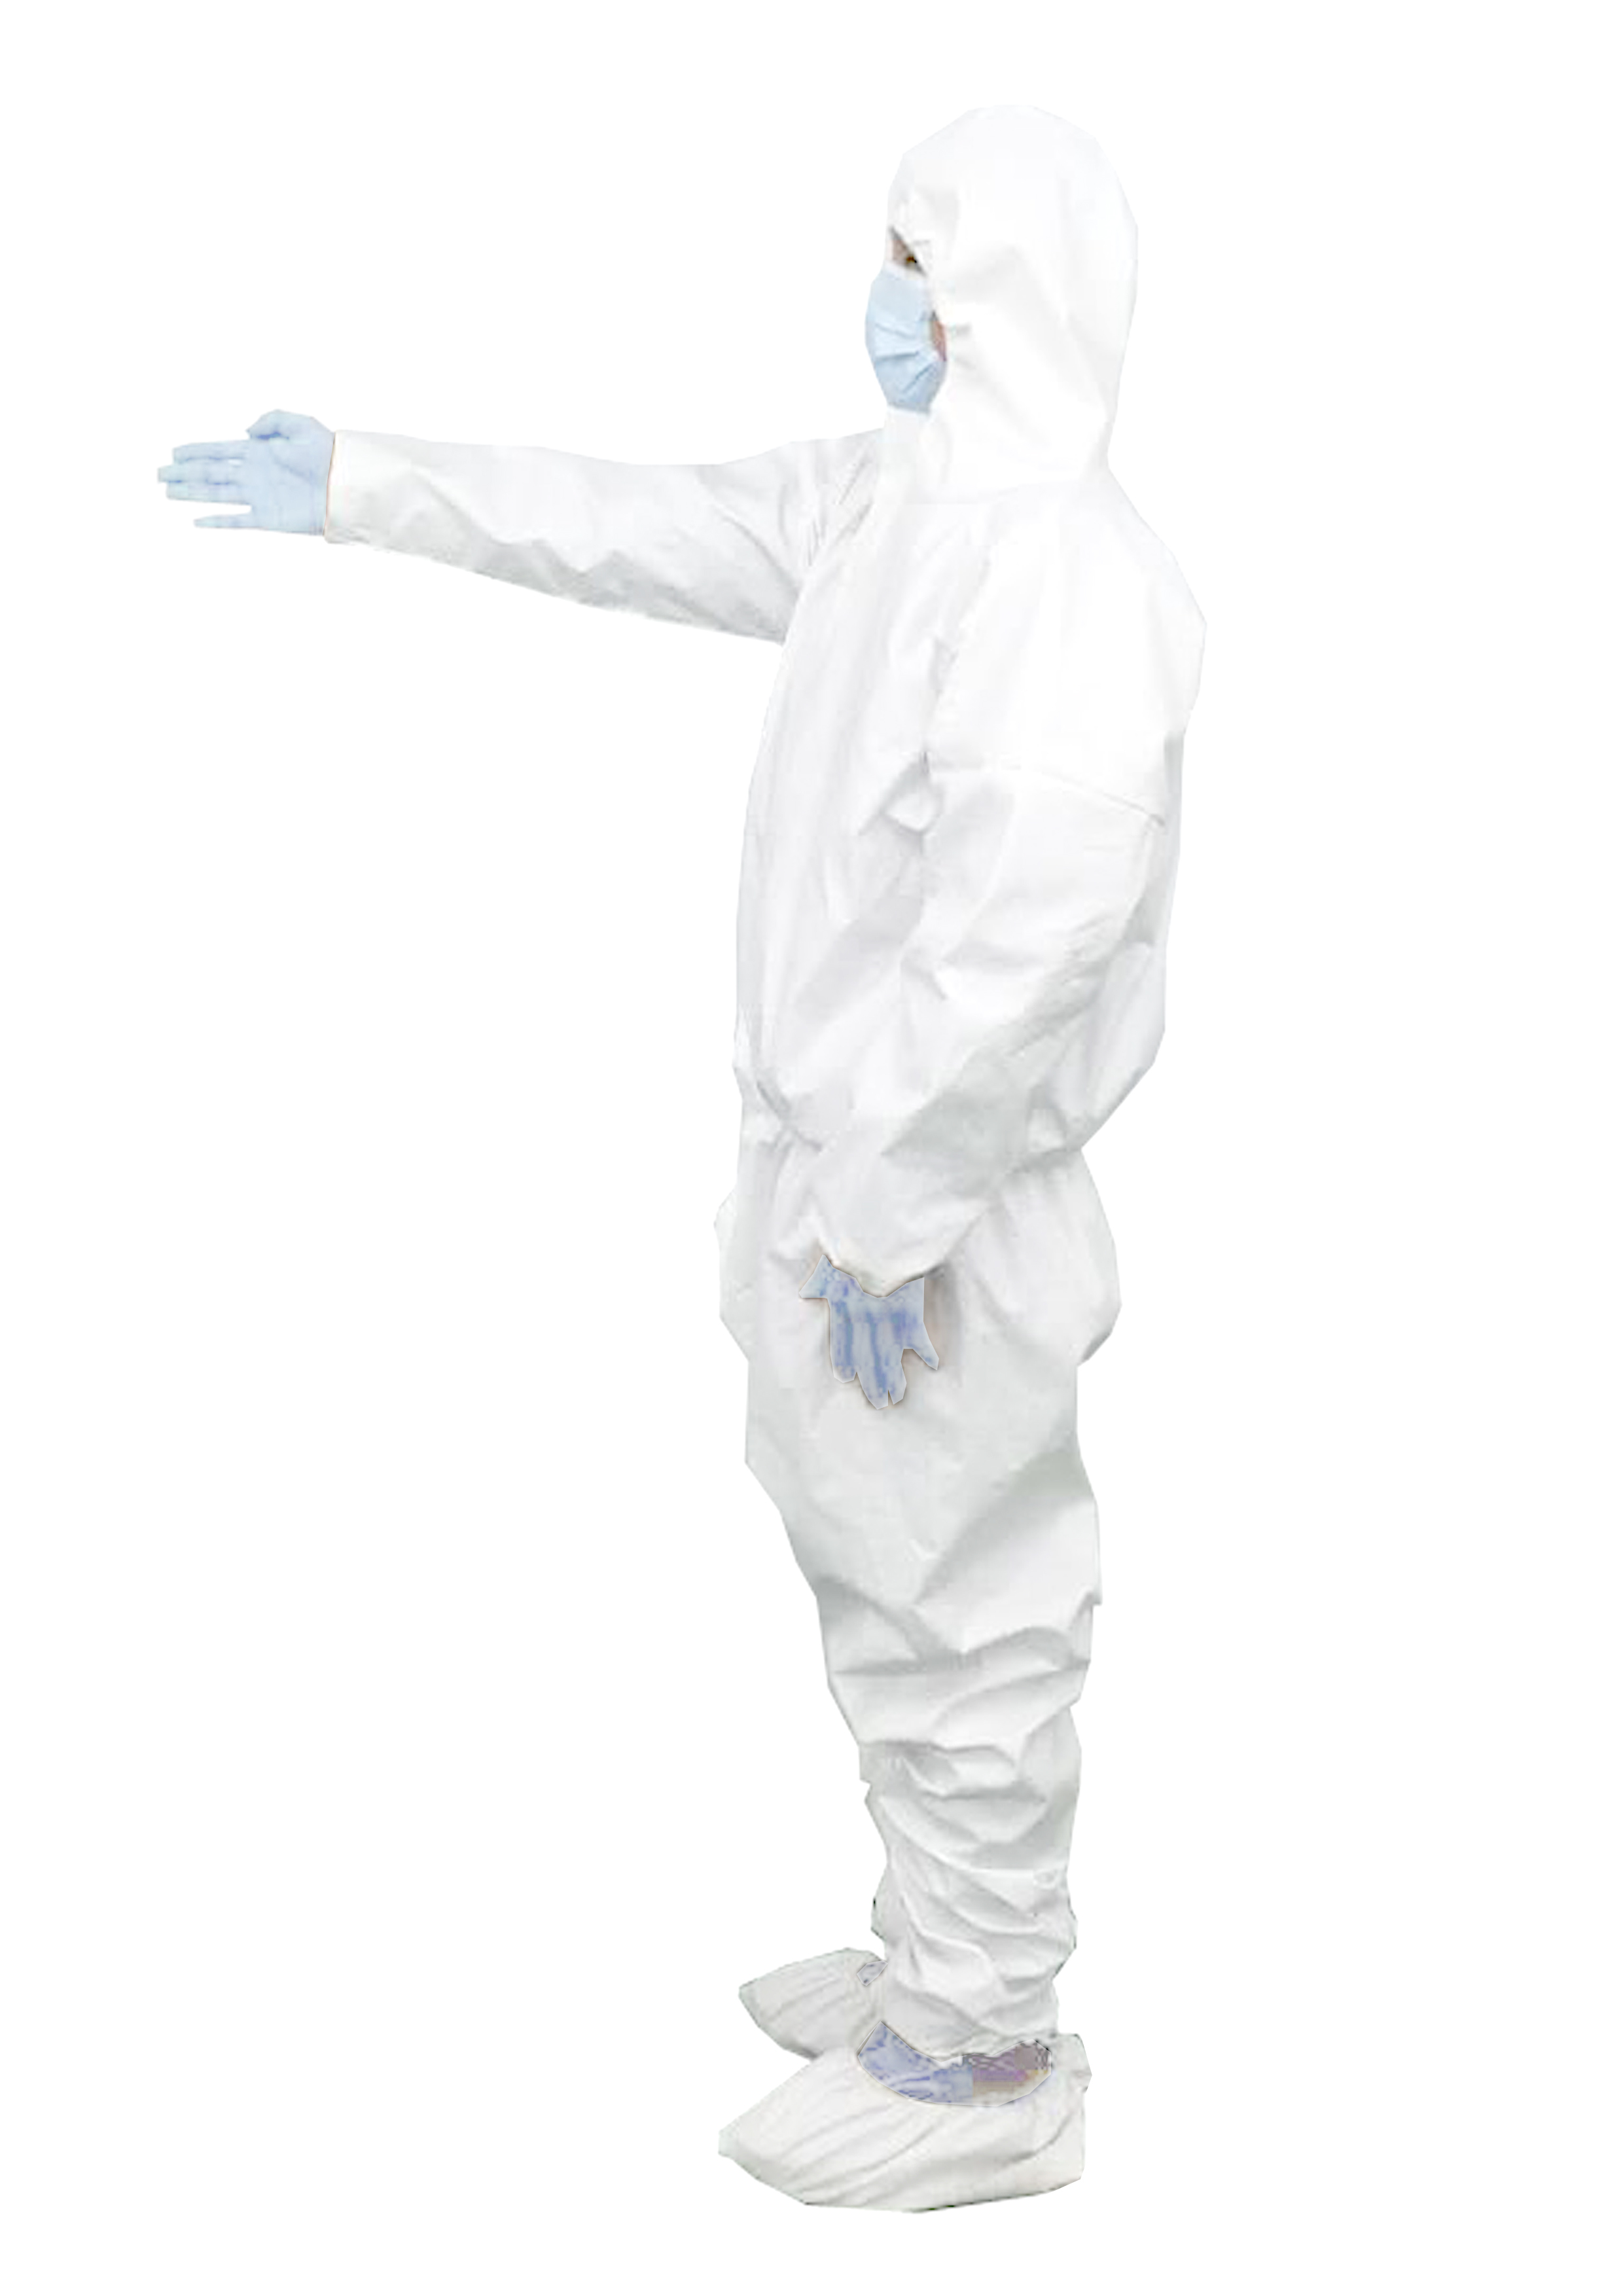 PP/PE Waterproof Liquid Resistance Antibacterial Non-woven Fabric Microporous Safety Protective Apparel Medical Coverall